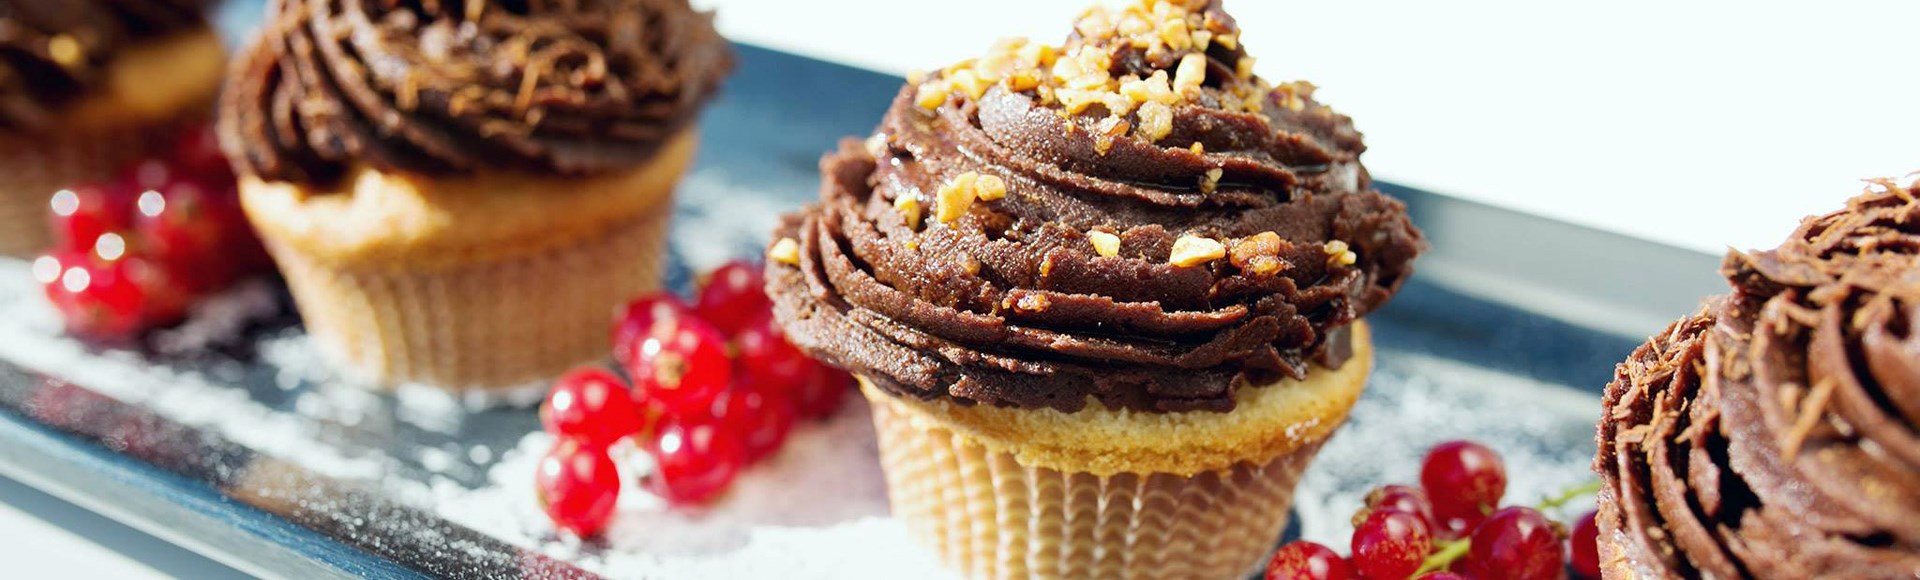 chocolate-cupcakes - Private Chef Service For Your Villa Holidays In Santorini, Cyclades, Greece